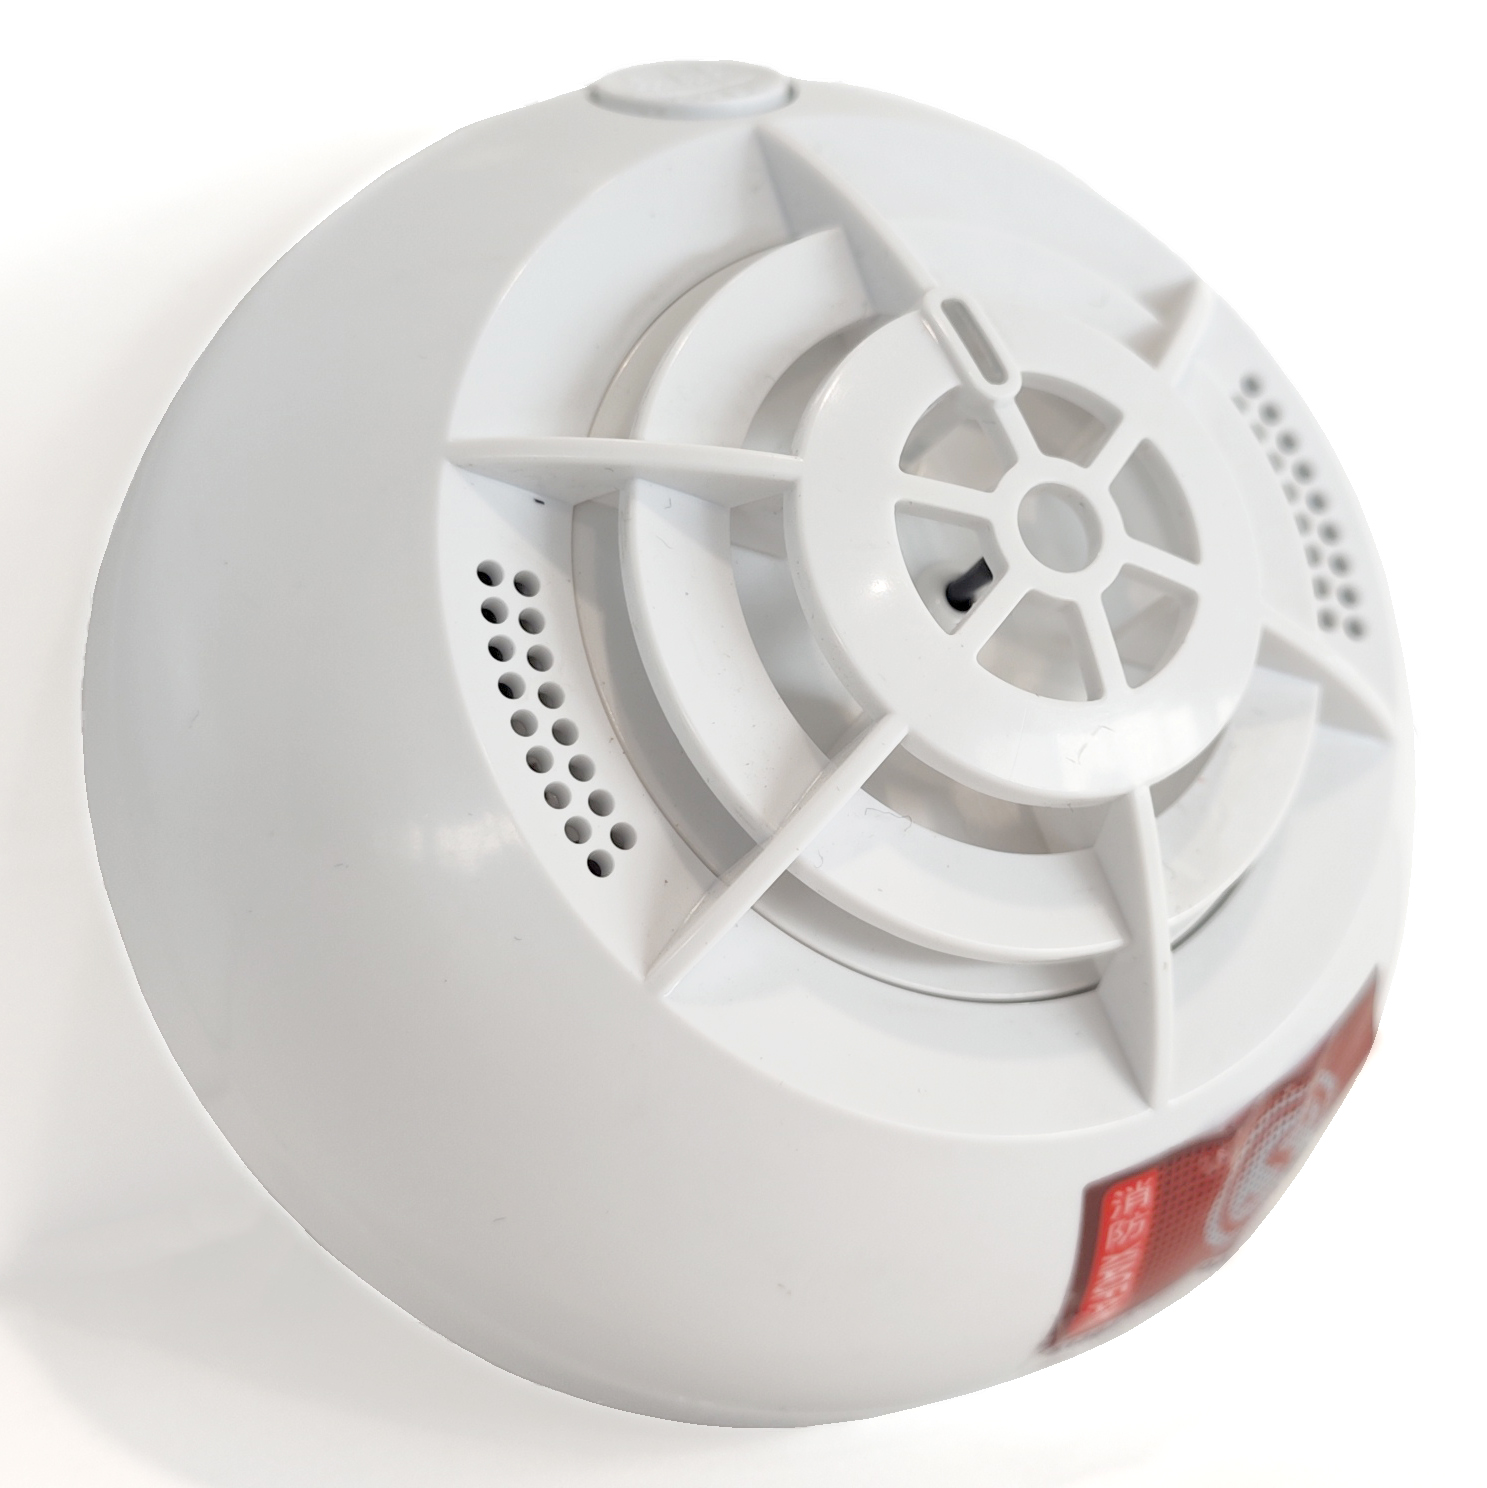 How Wireless Fire Alarm Systems Enhance Safety: Technology and Applications